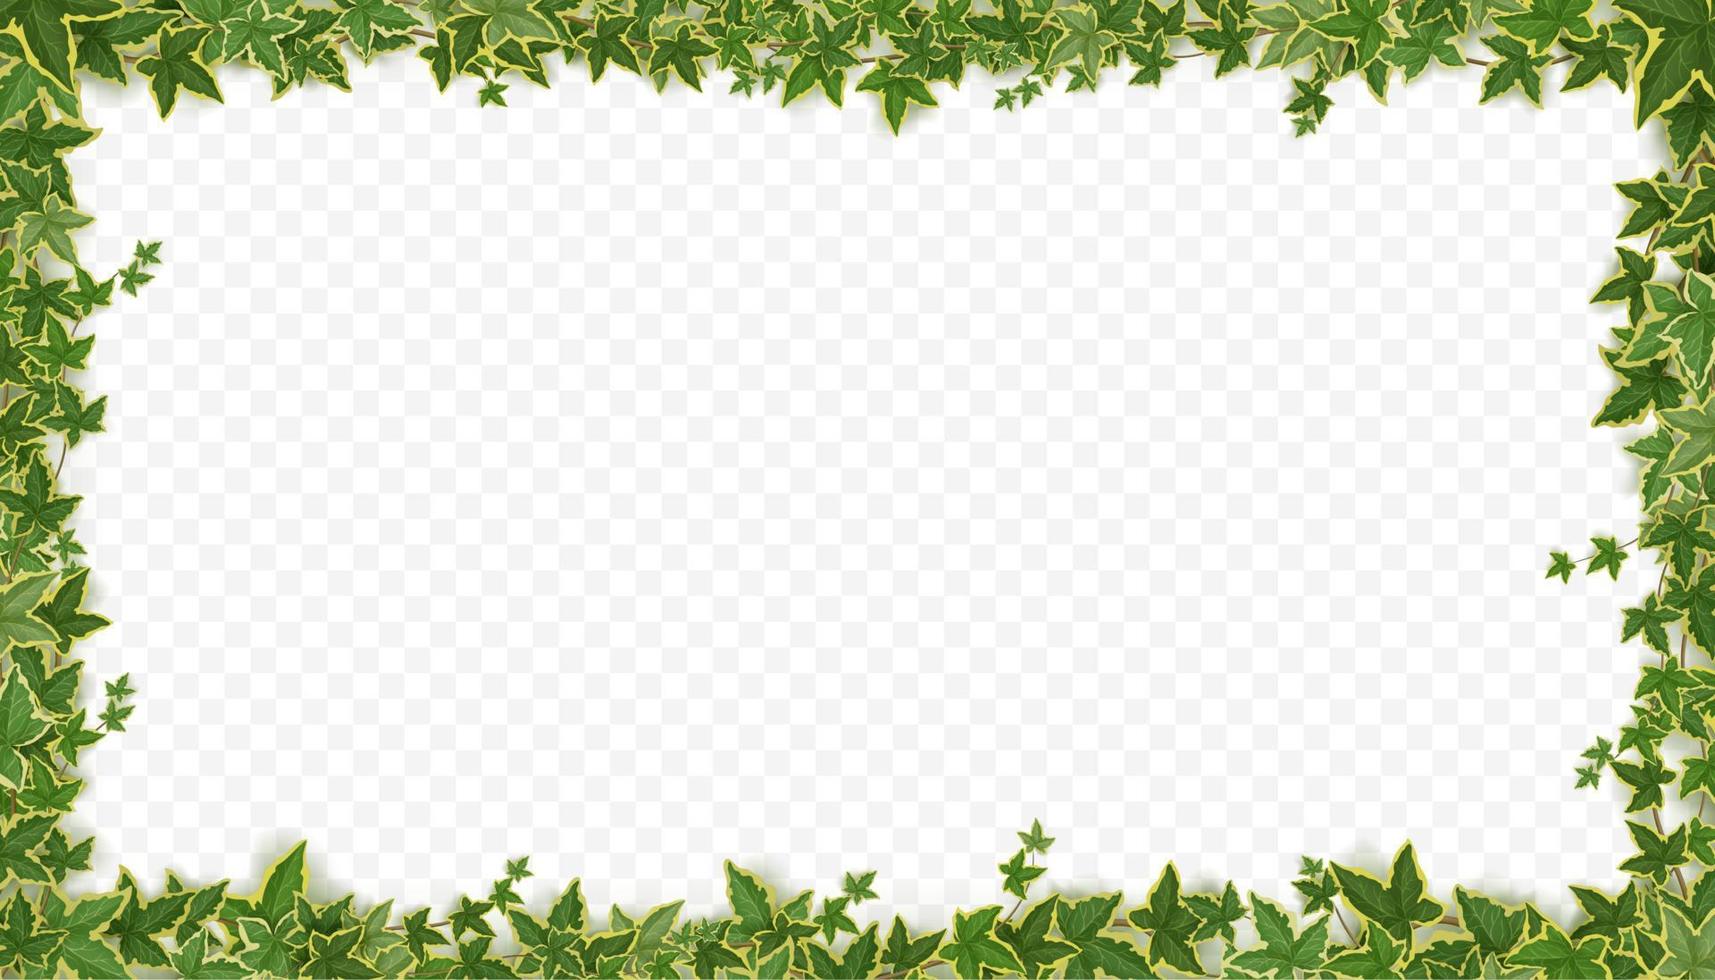 Frame of ivy vines with green leaves vector